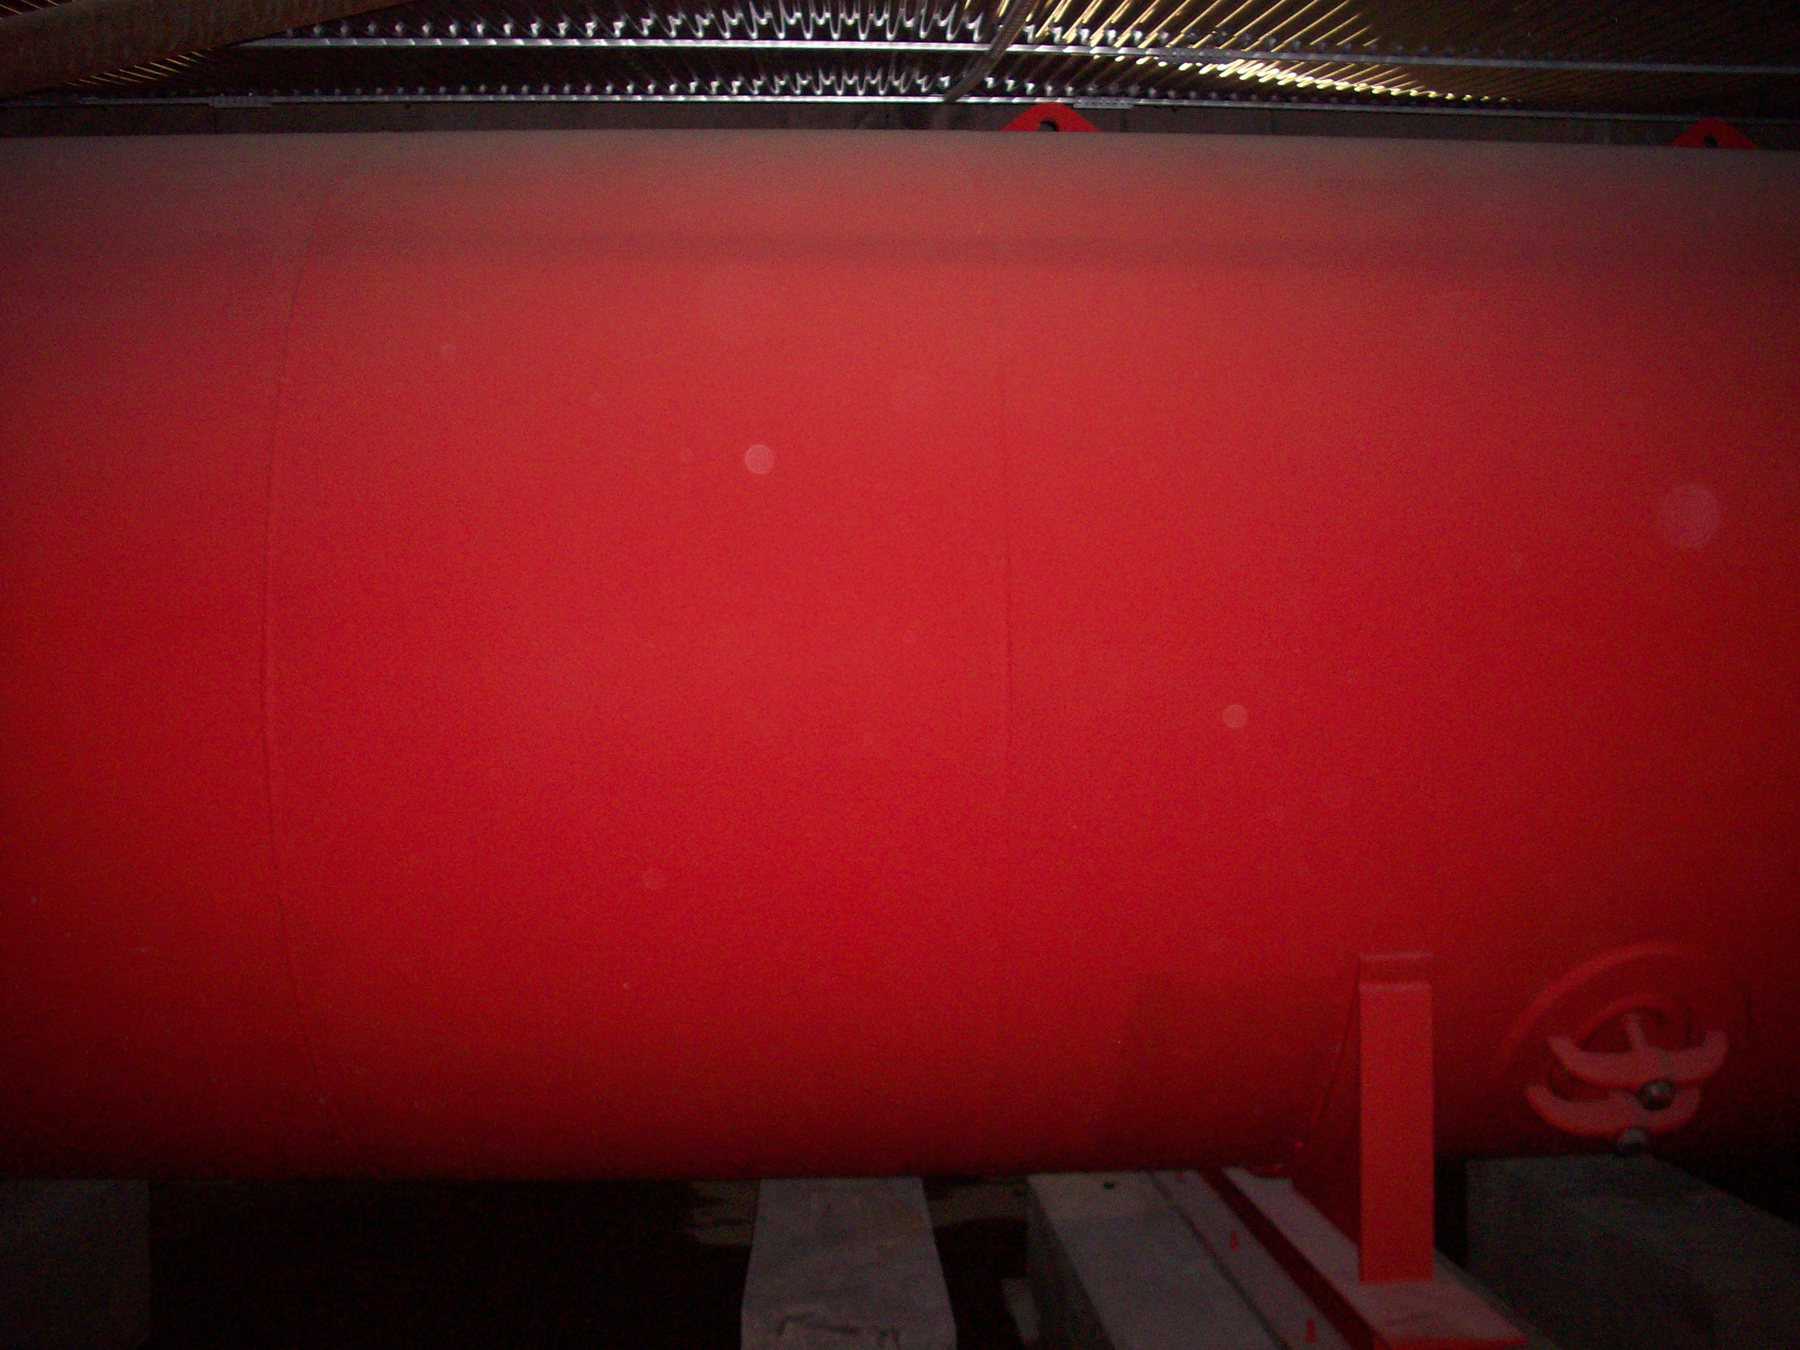 external cylinder tank painted in red